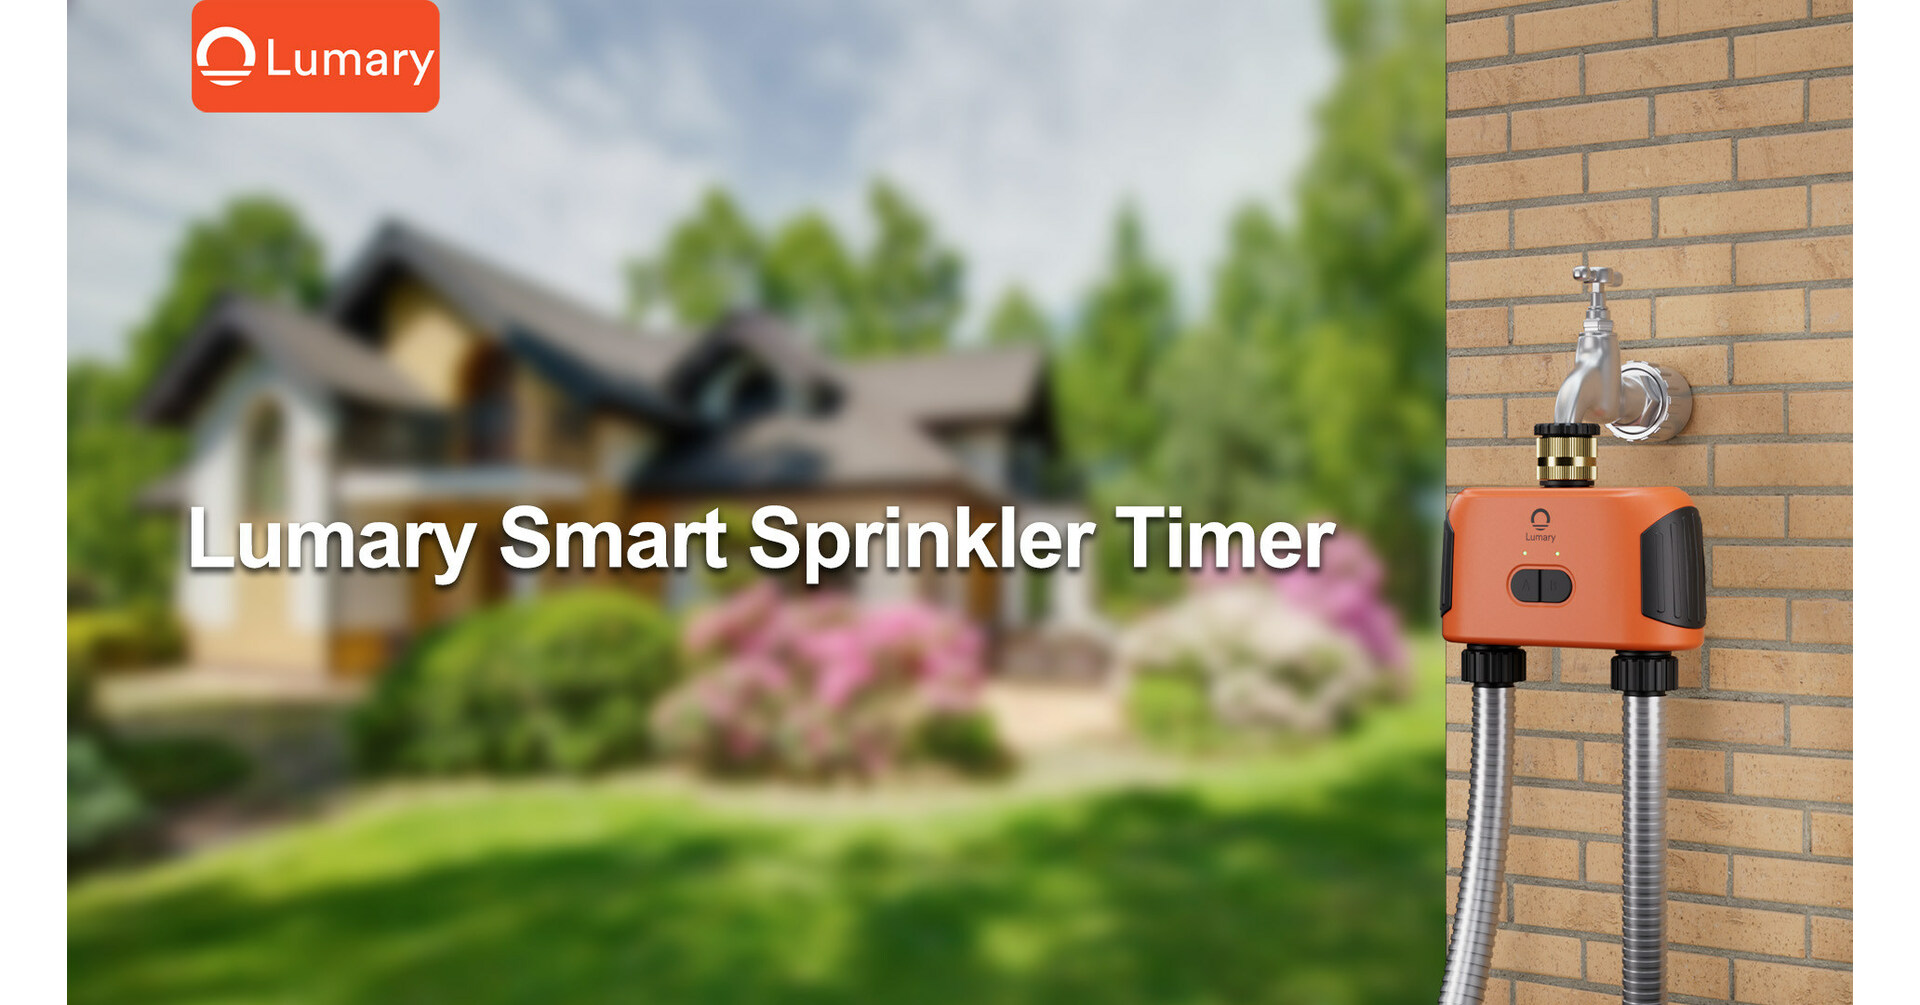 Lumary Introduces Sensible Sprinkler Water Timer